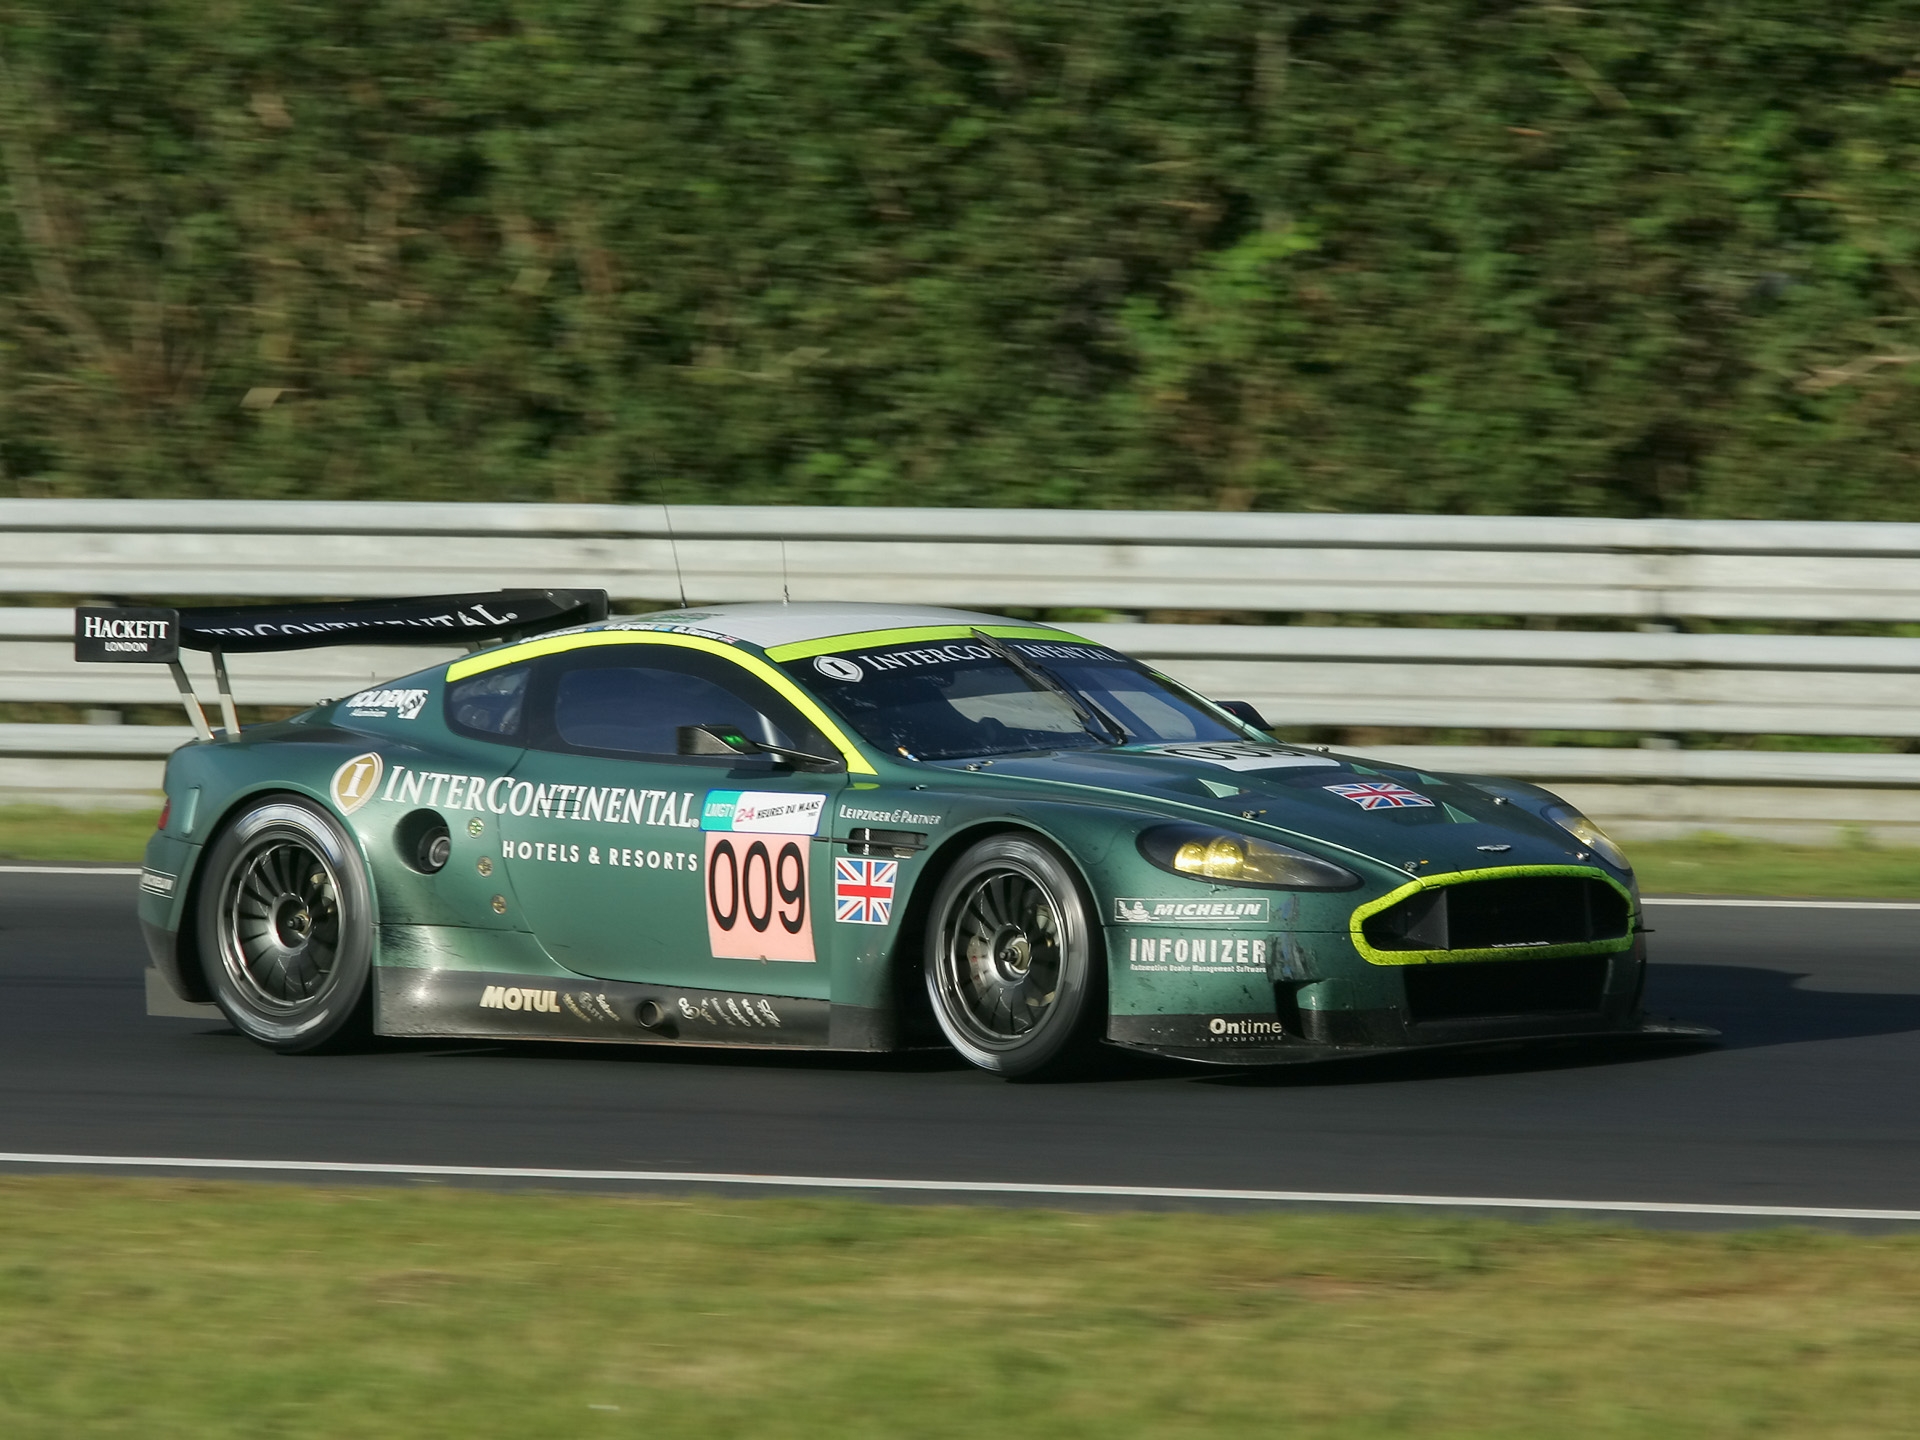 green, sports, auto, trees, grass, aston martin, cars, side view, speed, style, 2005, racing car, dbr9